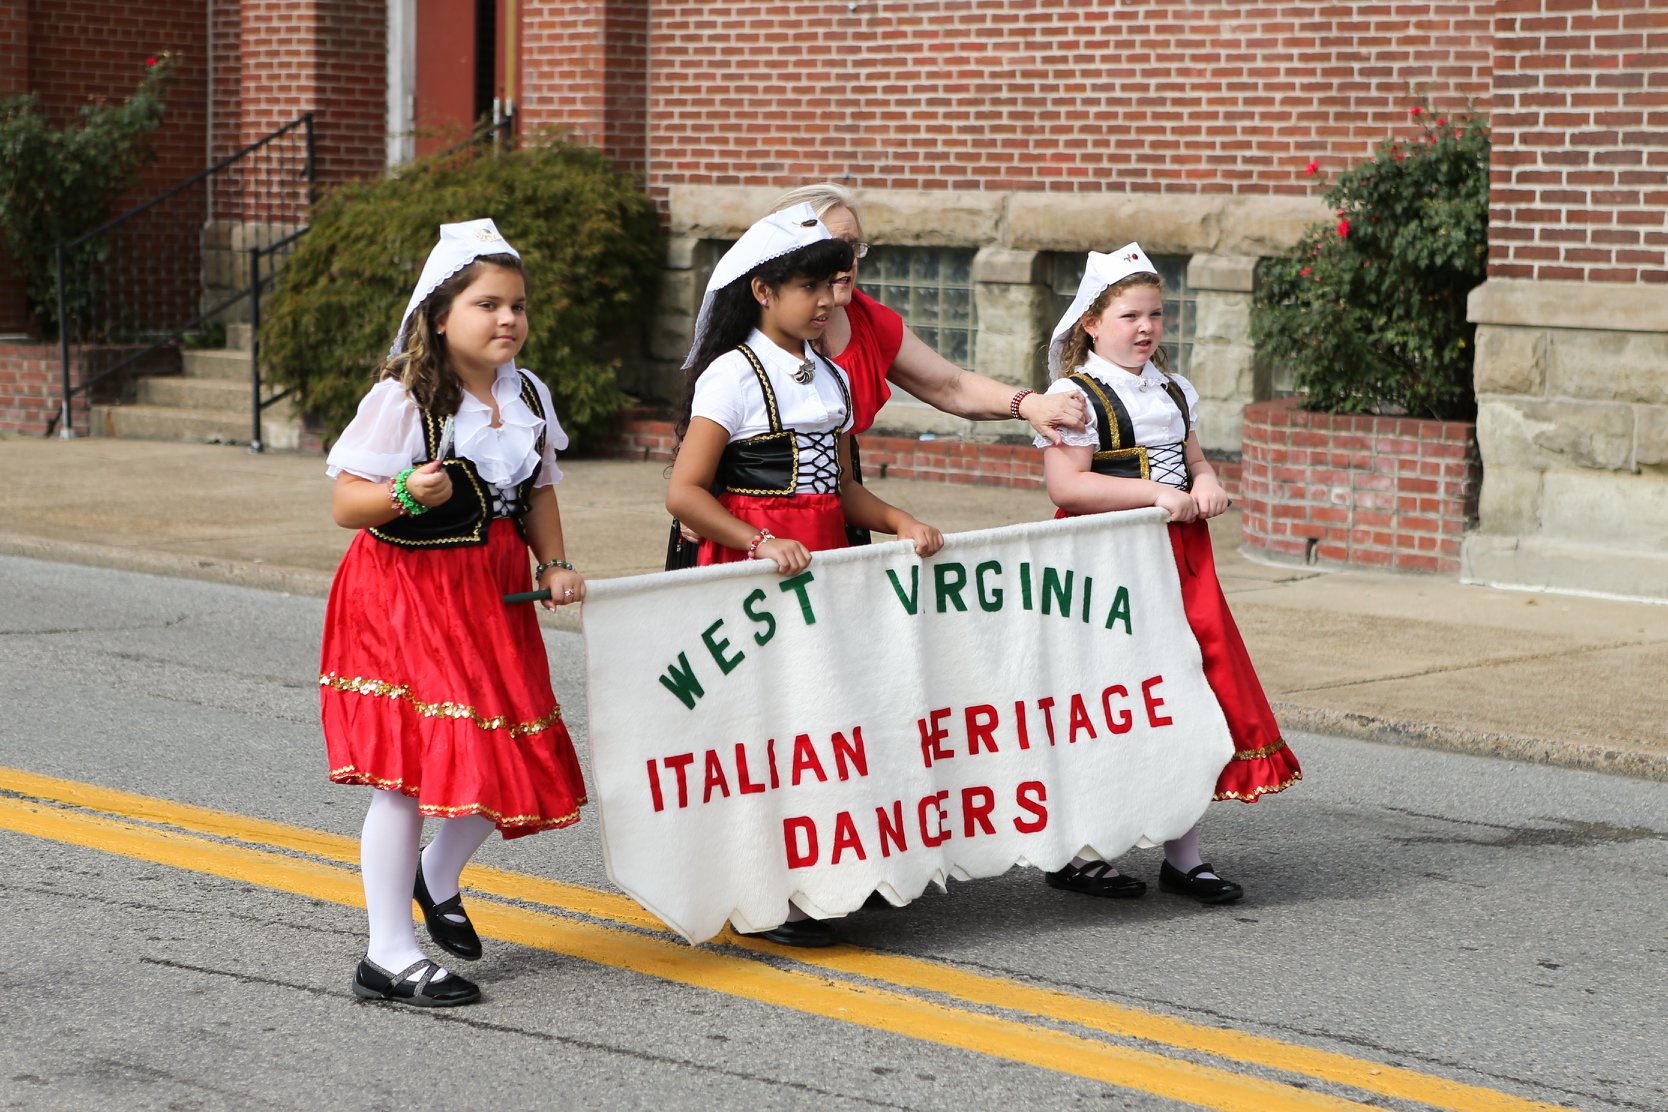 A group of children dressed in traditional Italian dress walk down a street holding a sign that reads West Virginia Italian Heritage Dancers.